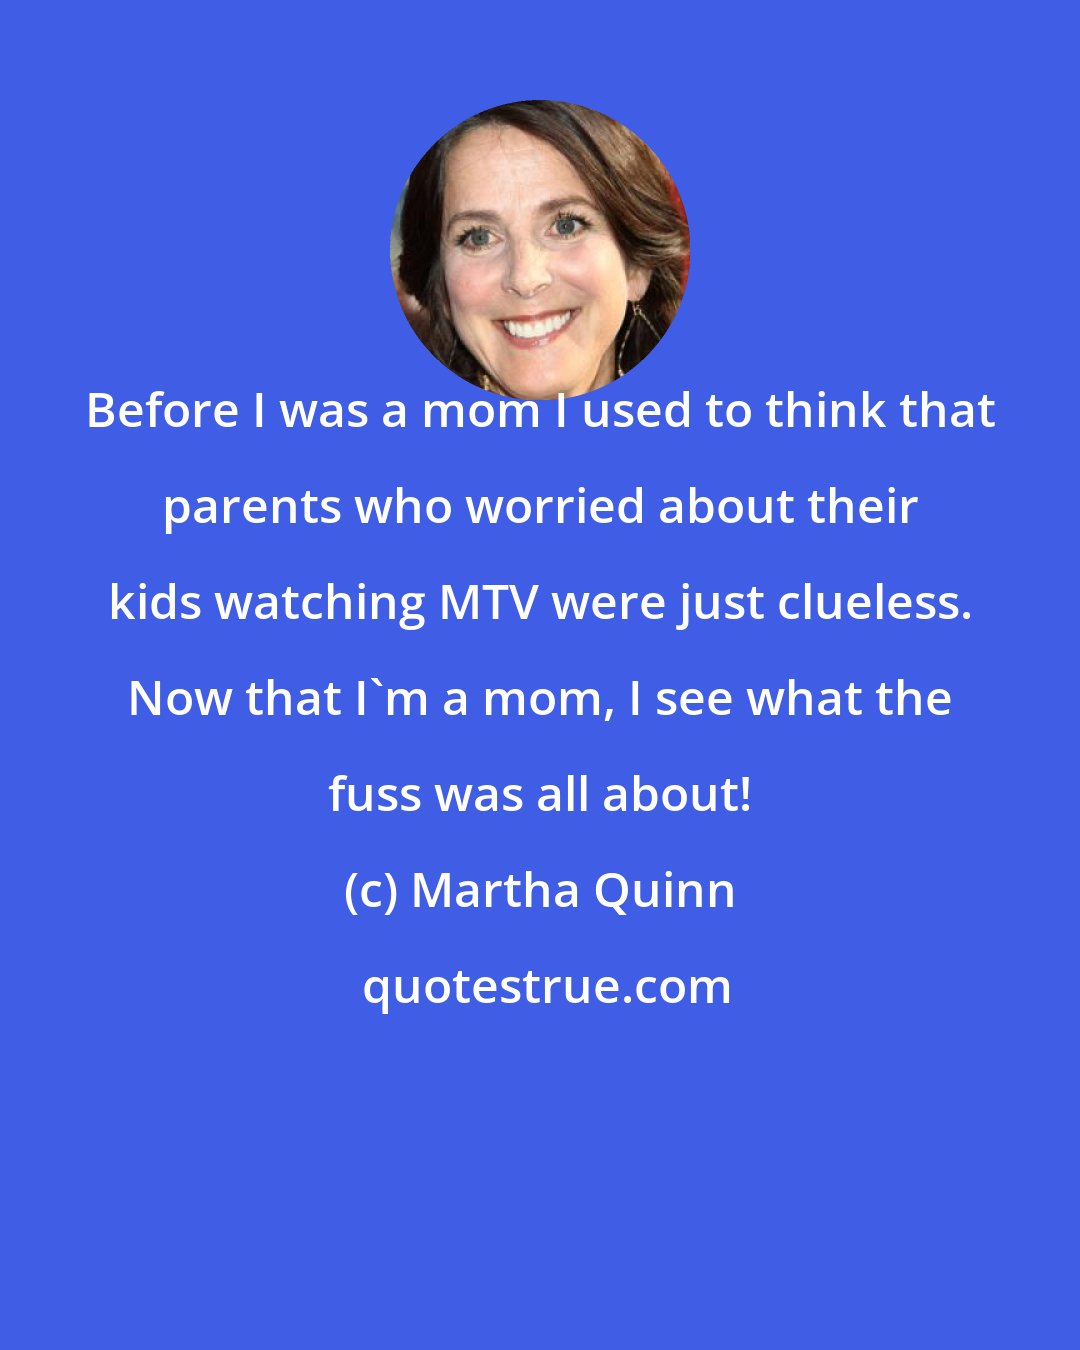 Martha Quinn: Before I was a mom I used to think that parents who worried about their kids watching MTV were just clueless. Now that I'm a mom, I see what the fuss was all about!